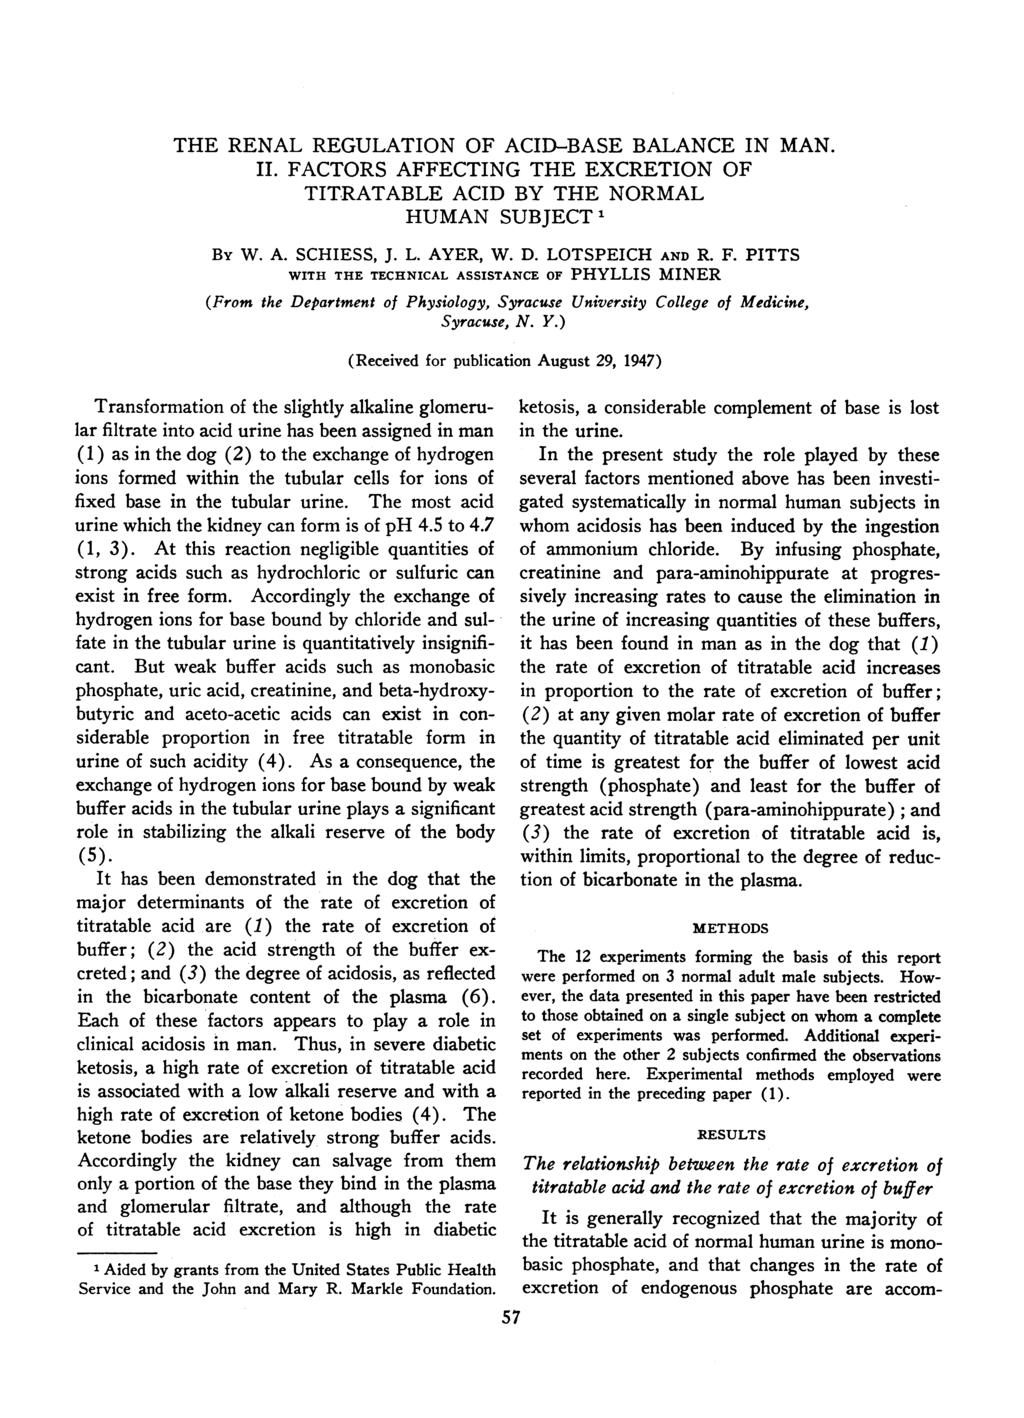 THE RENAL REGULATION OF ACID-BASE BALANCE IN MAN. II. FACTORS AFFECTING THE EXCRETION OF TITRATABLE ACID BY THE NORMAL HUMAN SUBJECT 1 By W. A. SCHIESS, J. L. AYER, W. D. LOTSPEICH AND R. F. PITTS WITH THE TECHNICAL ASSISTANCE OF PHYLLIS MINER (From the Department of Physiology, Syracuse University College of Medicine, Syracuse, N.